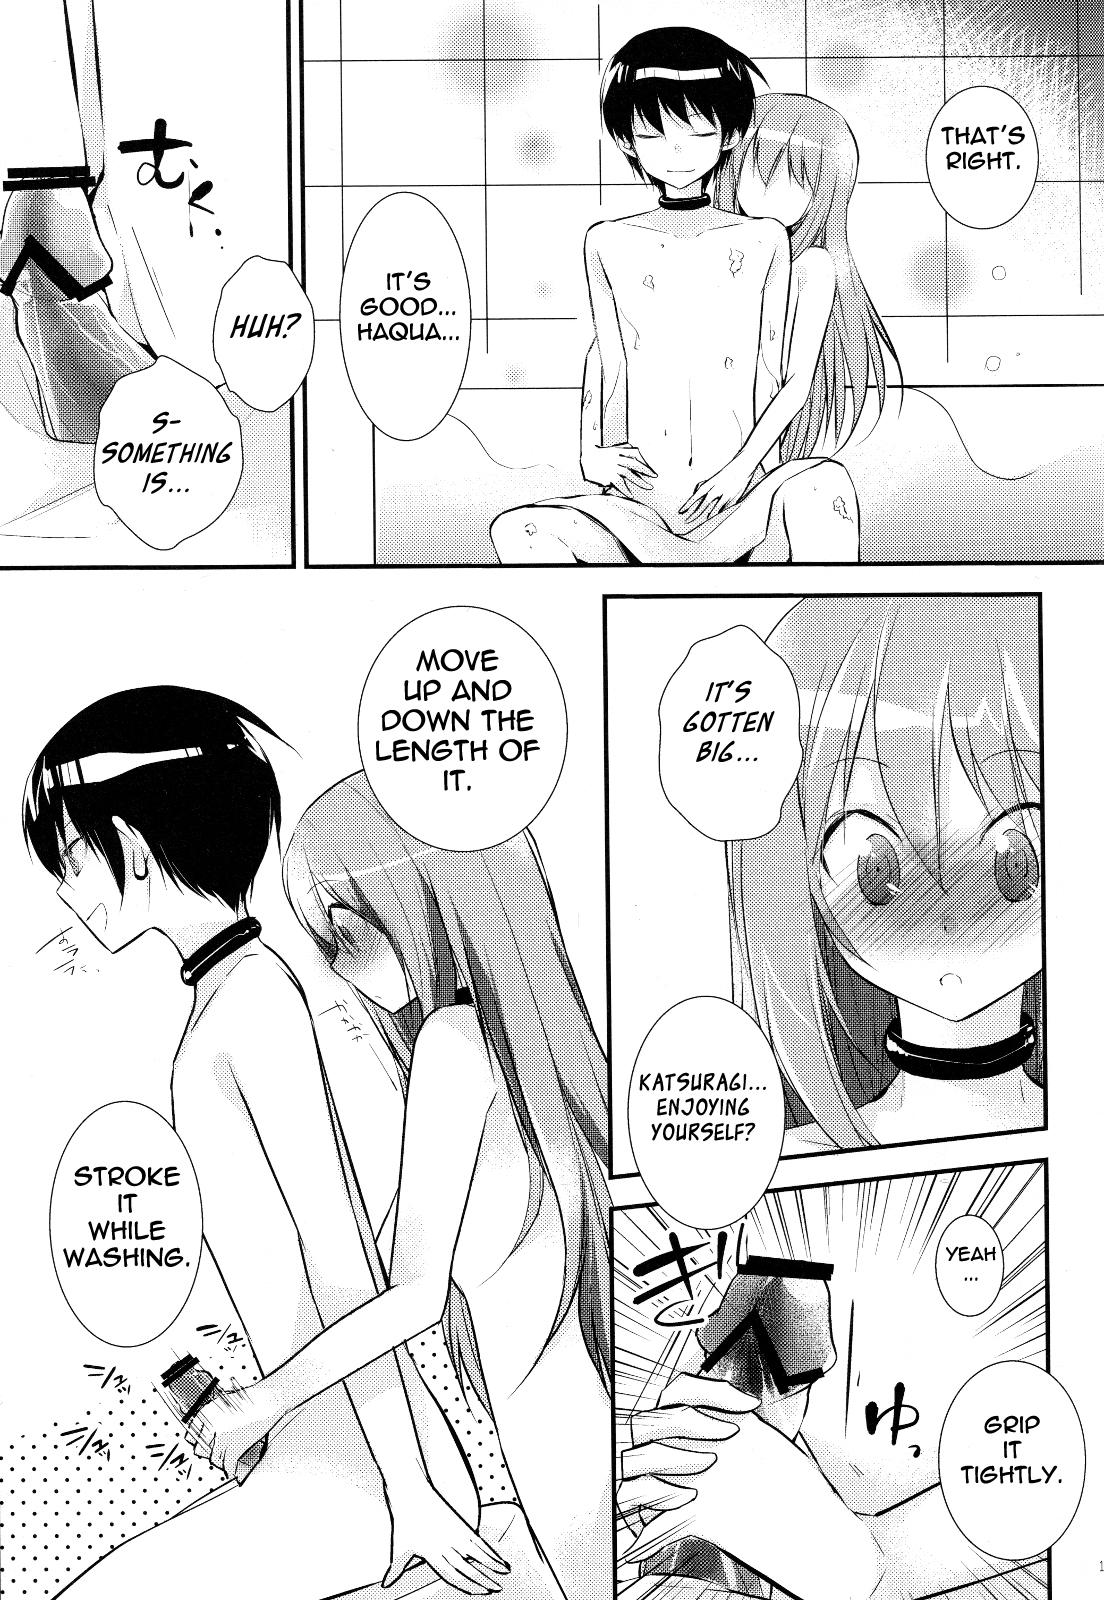 Best Blowjobs Kamisama no Hentai Play Nikkichou 4 | Kamisama's Hentai Play Diary 4 - The world god only knows Insertion - Page 10